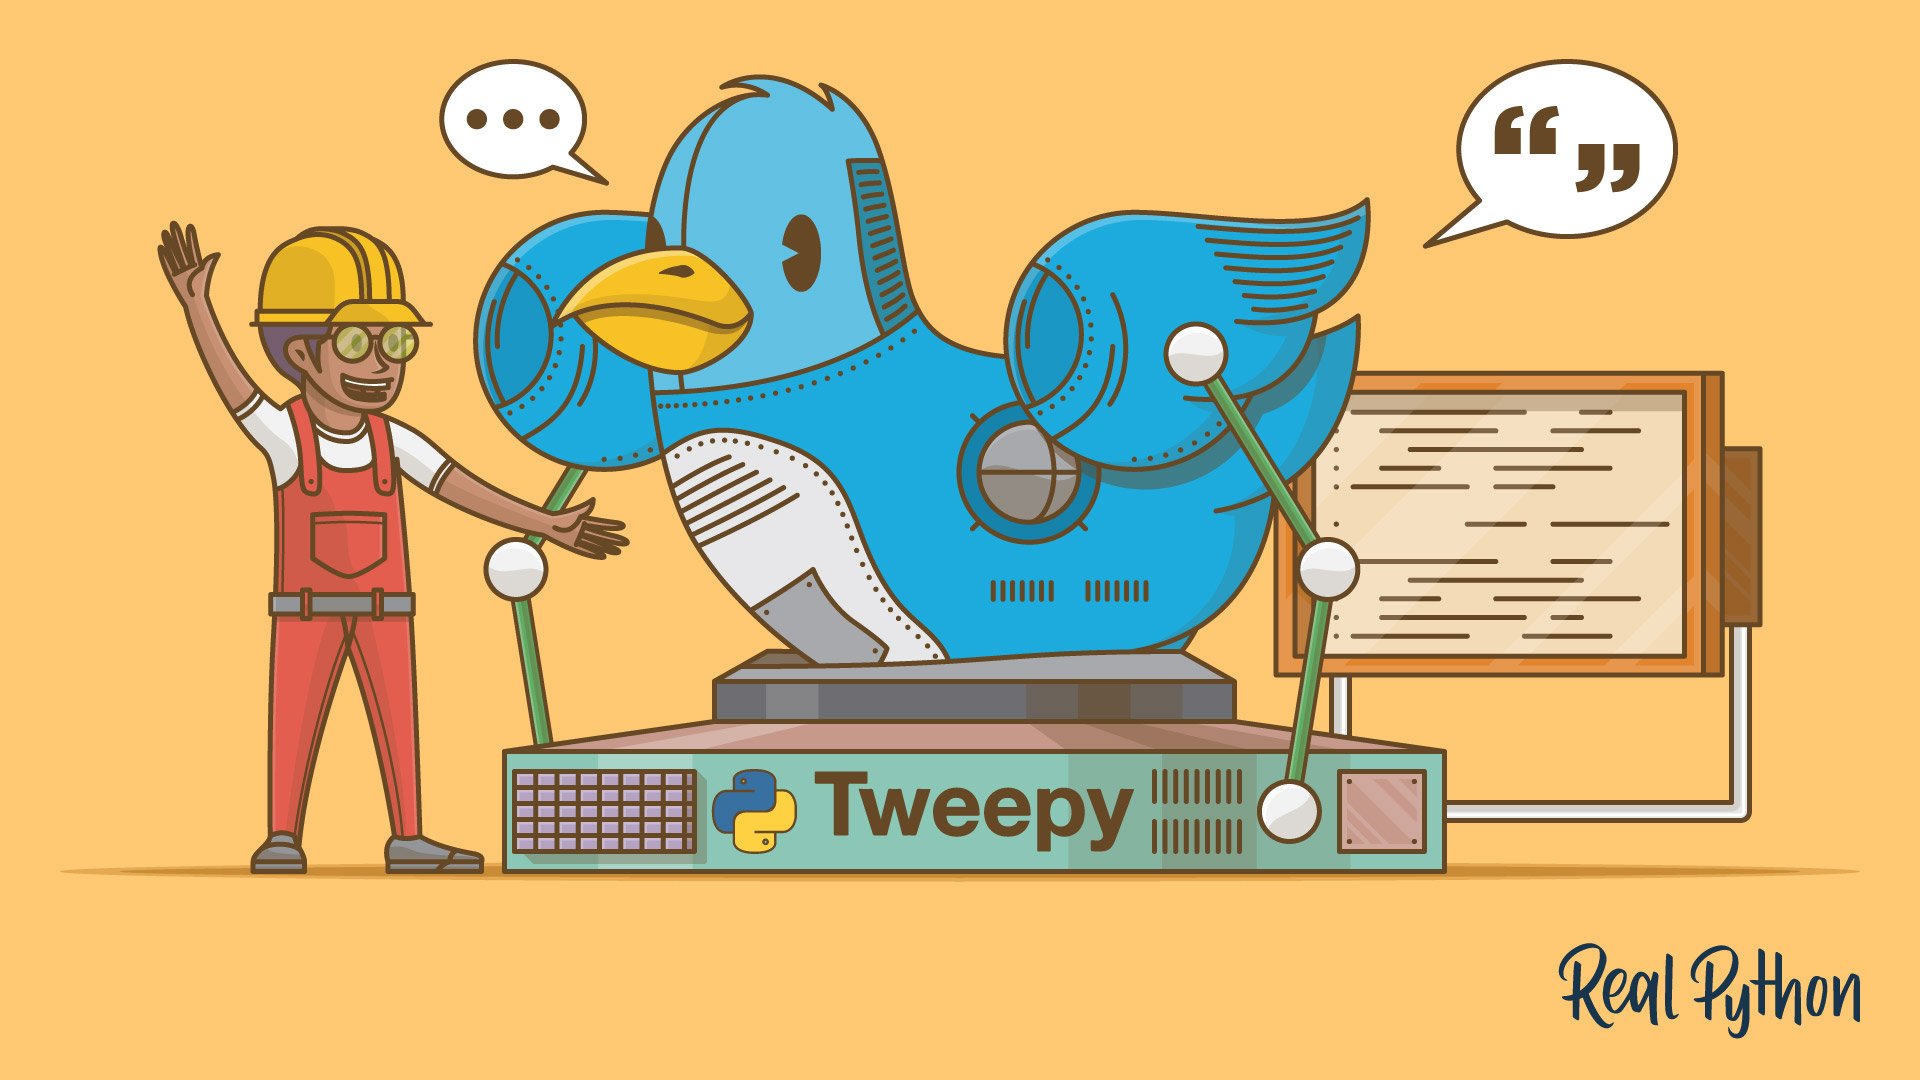 How to Make a Twitter Bot in Python With Tweepy